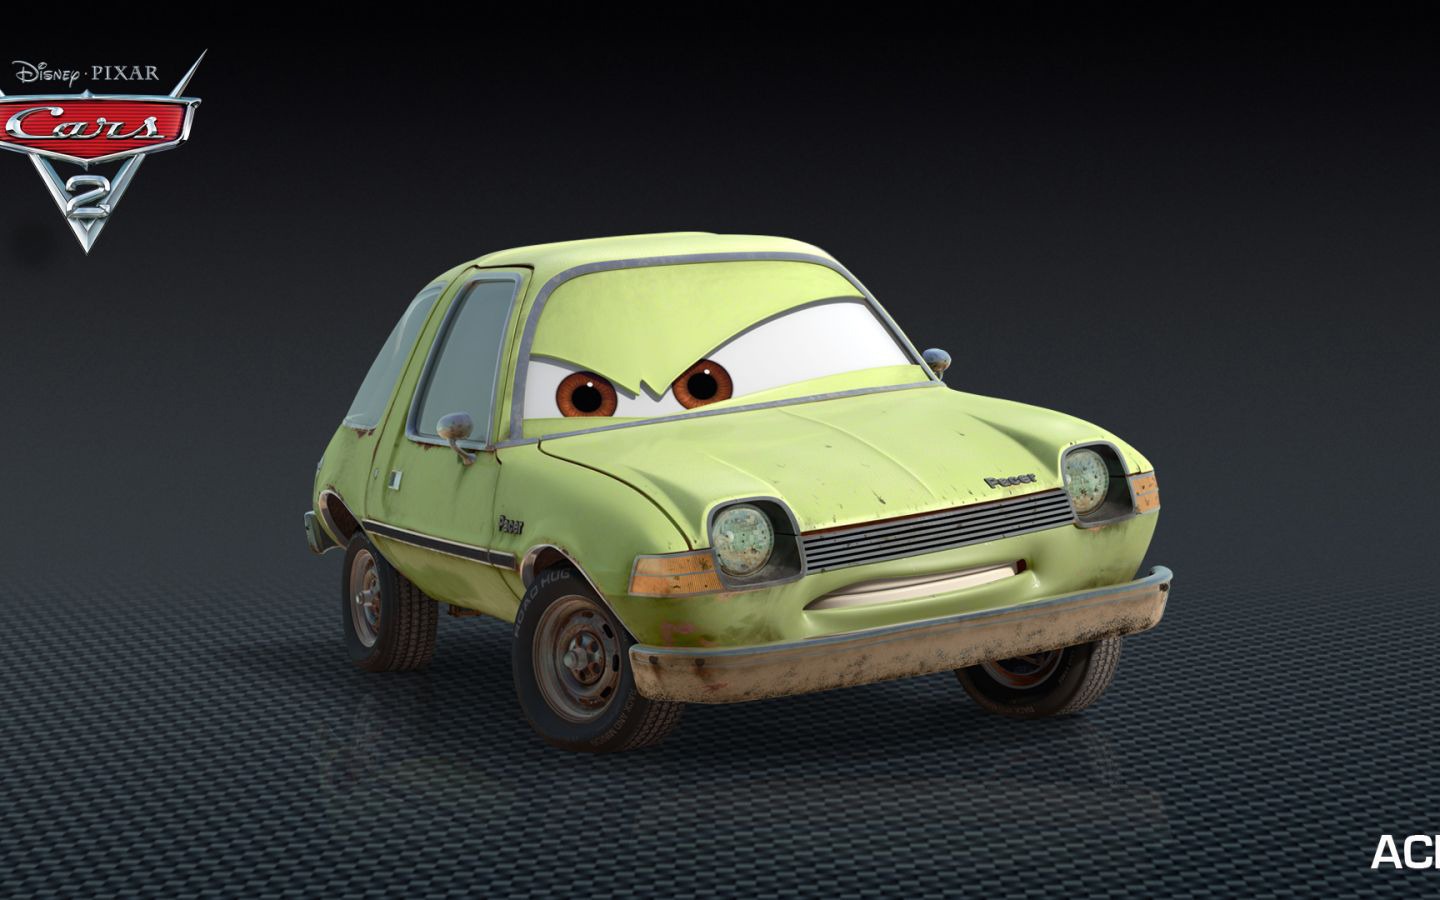 Cars 2 wallpapers #21 - 1440x900